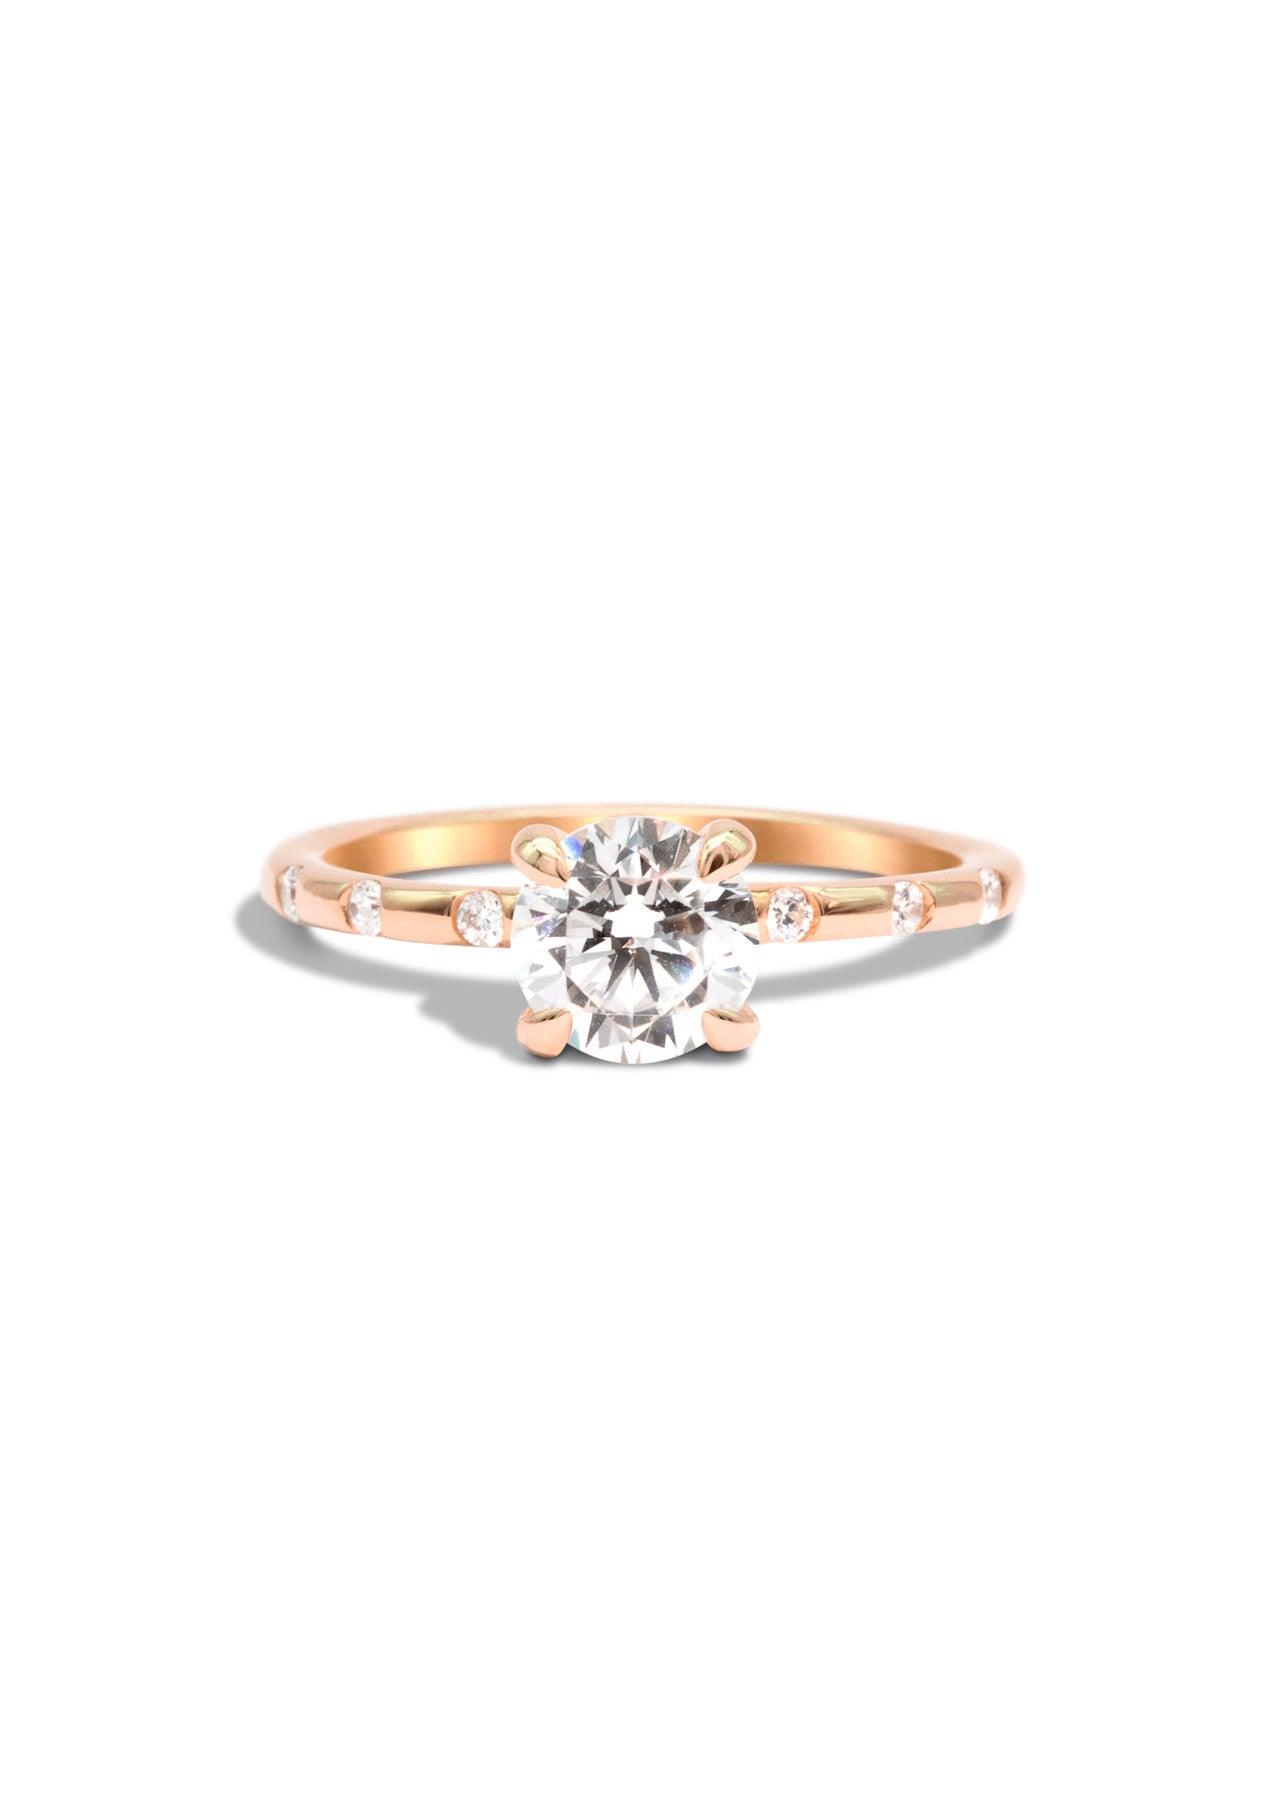 The Constance Rose Gold Cultured Diamond Ring